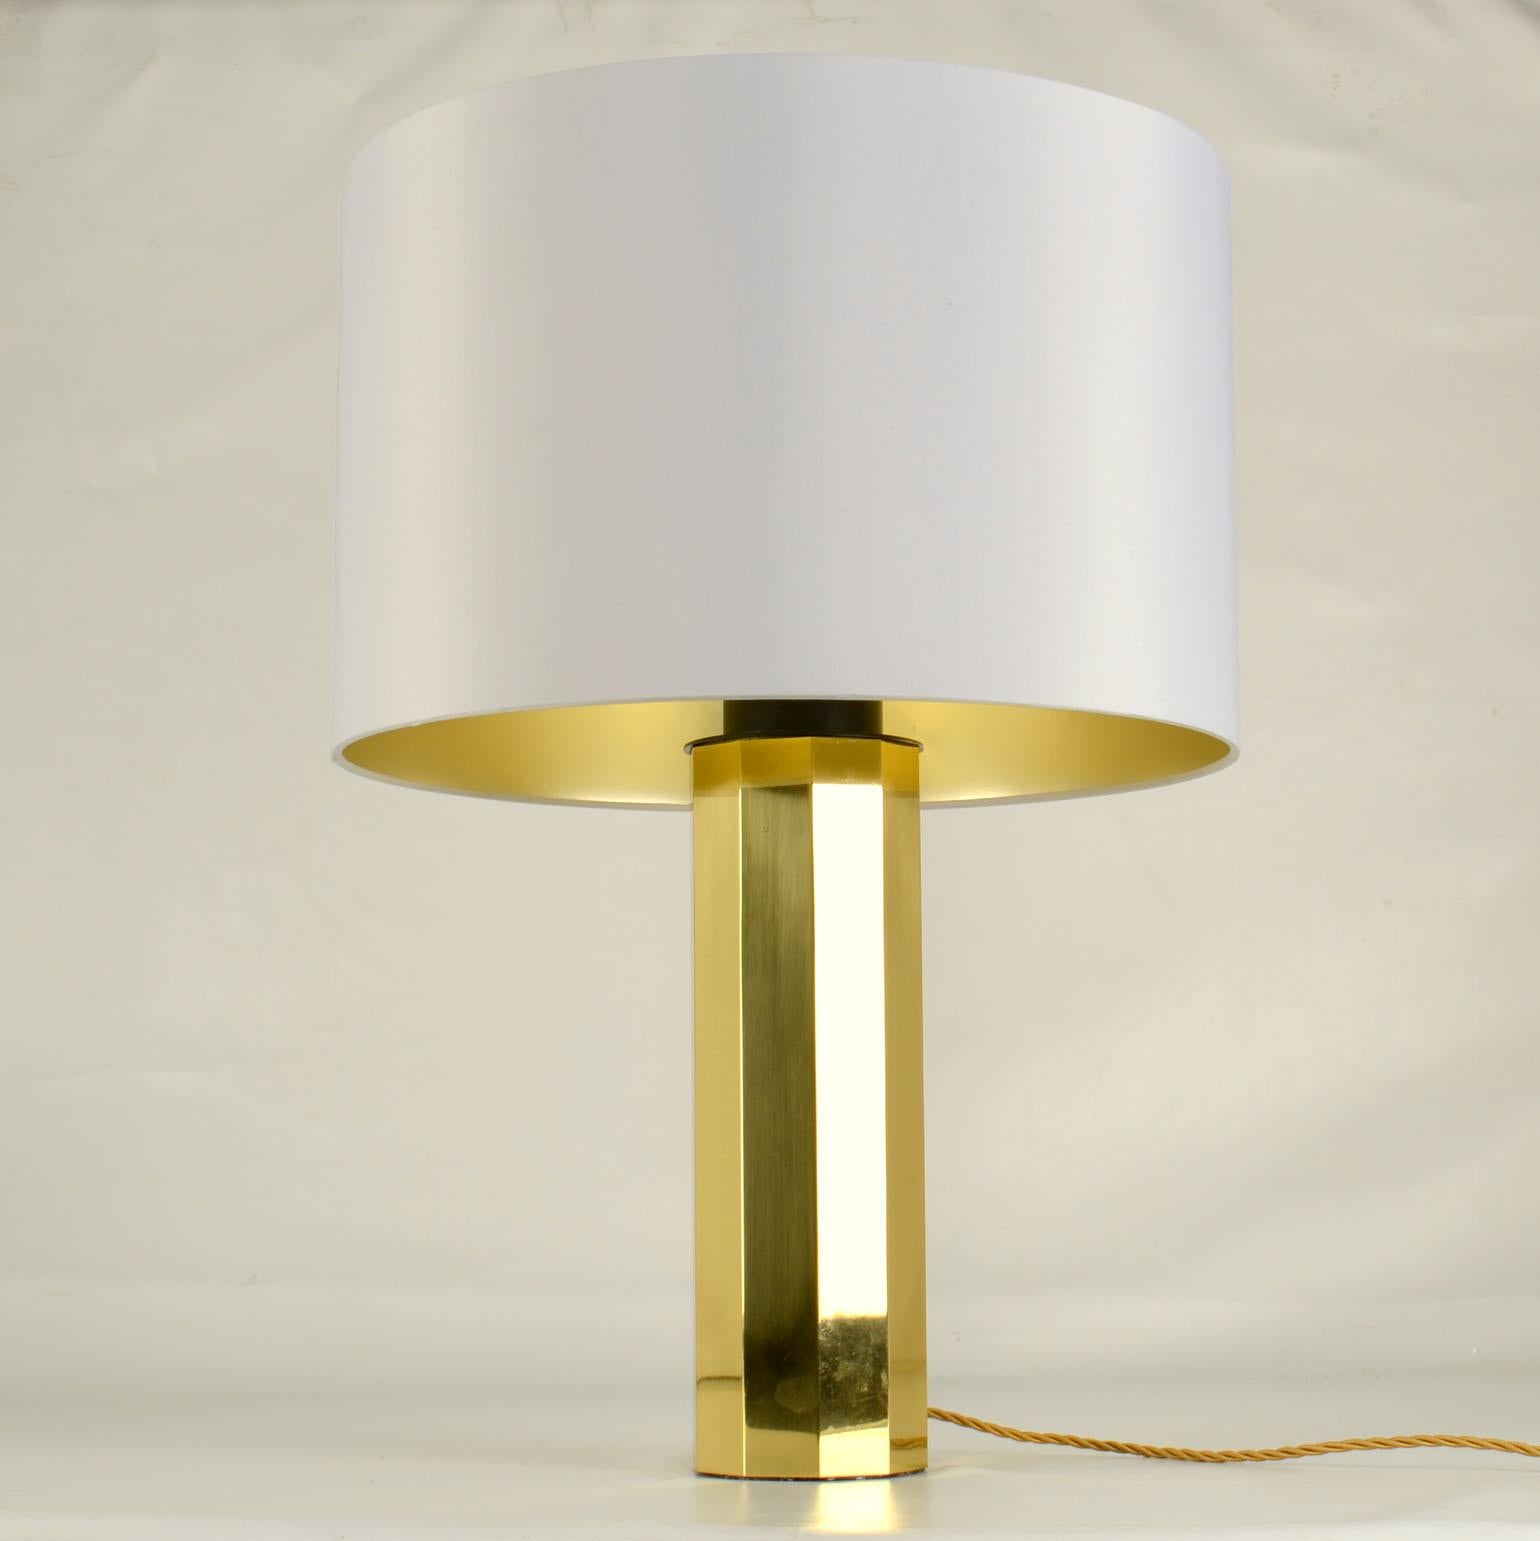 Pair of Tall Minimalist Brass Table Lamps with Octagonal Base In Excellent Condition For Sale In London, GB